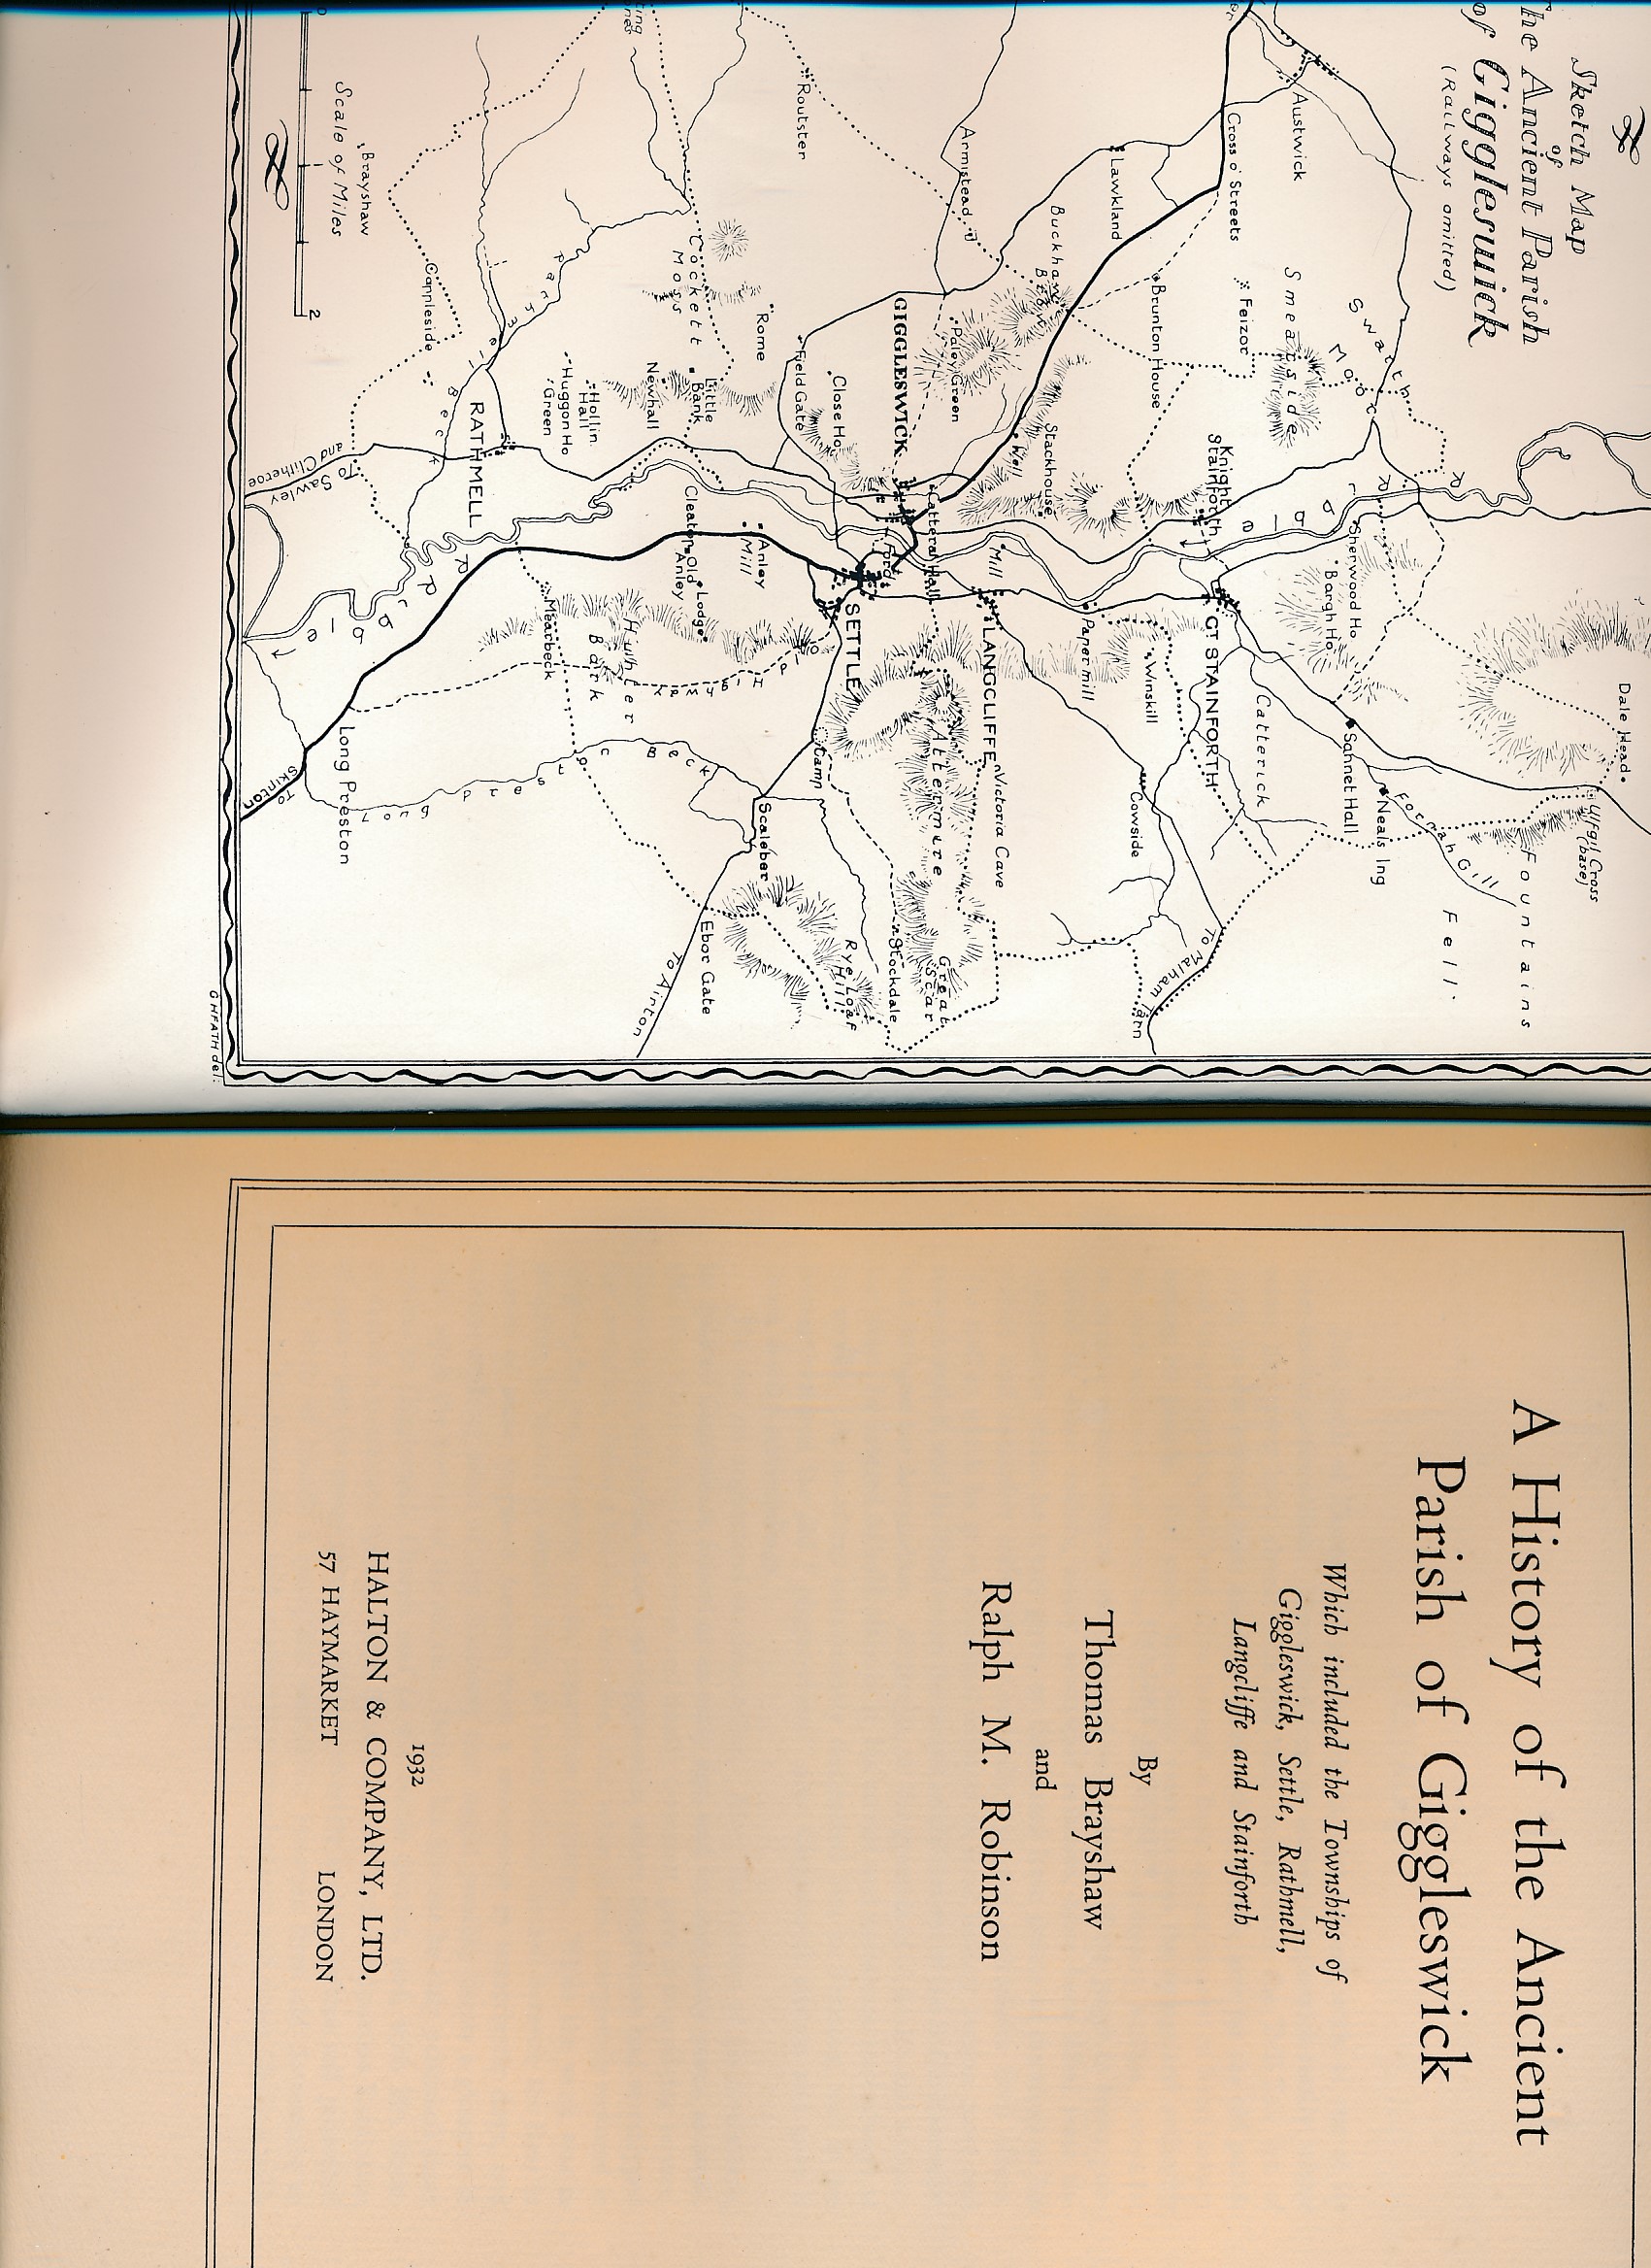 A History of the Ancient Parish of Giggleswick Which Included the Townships of Giggleswick, Settle, Rathmell, Langcliffe and Stainforth